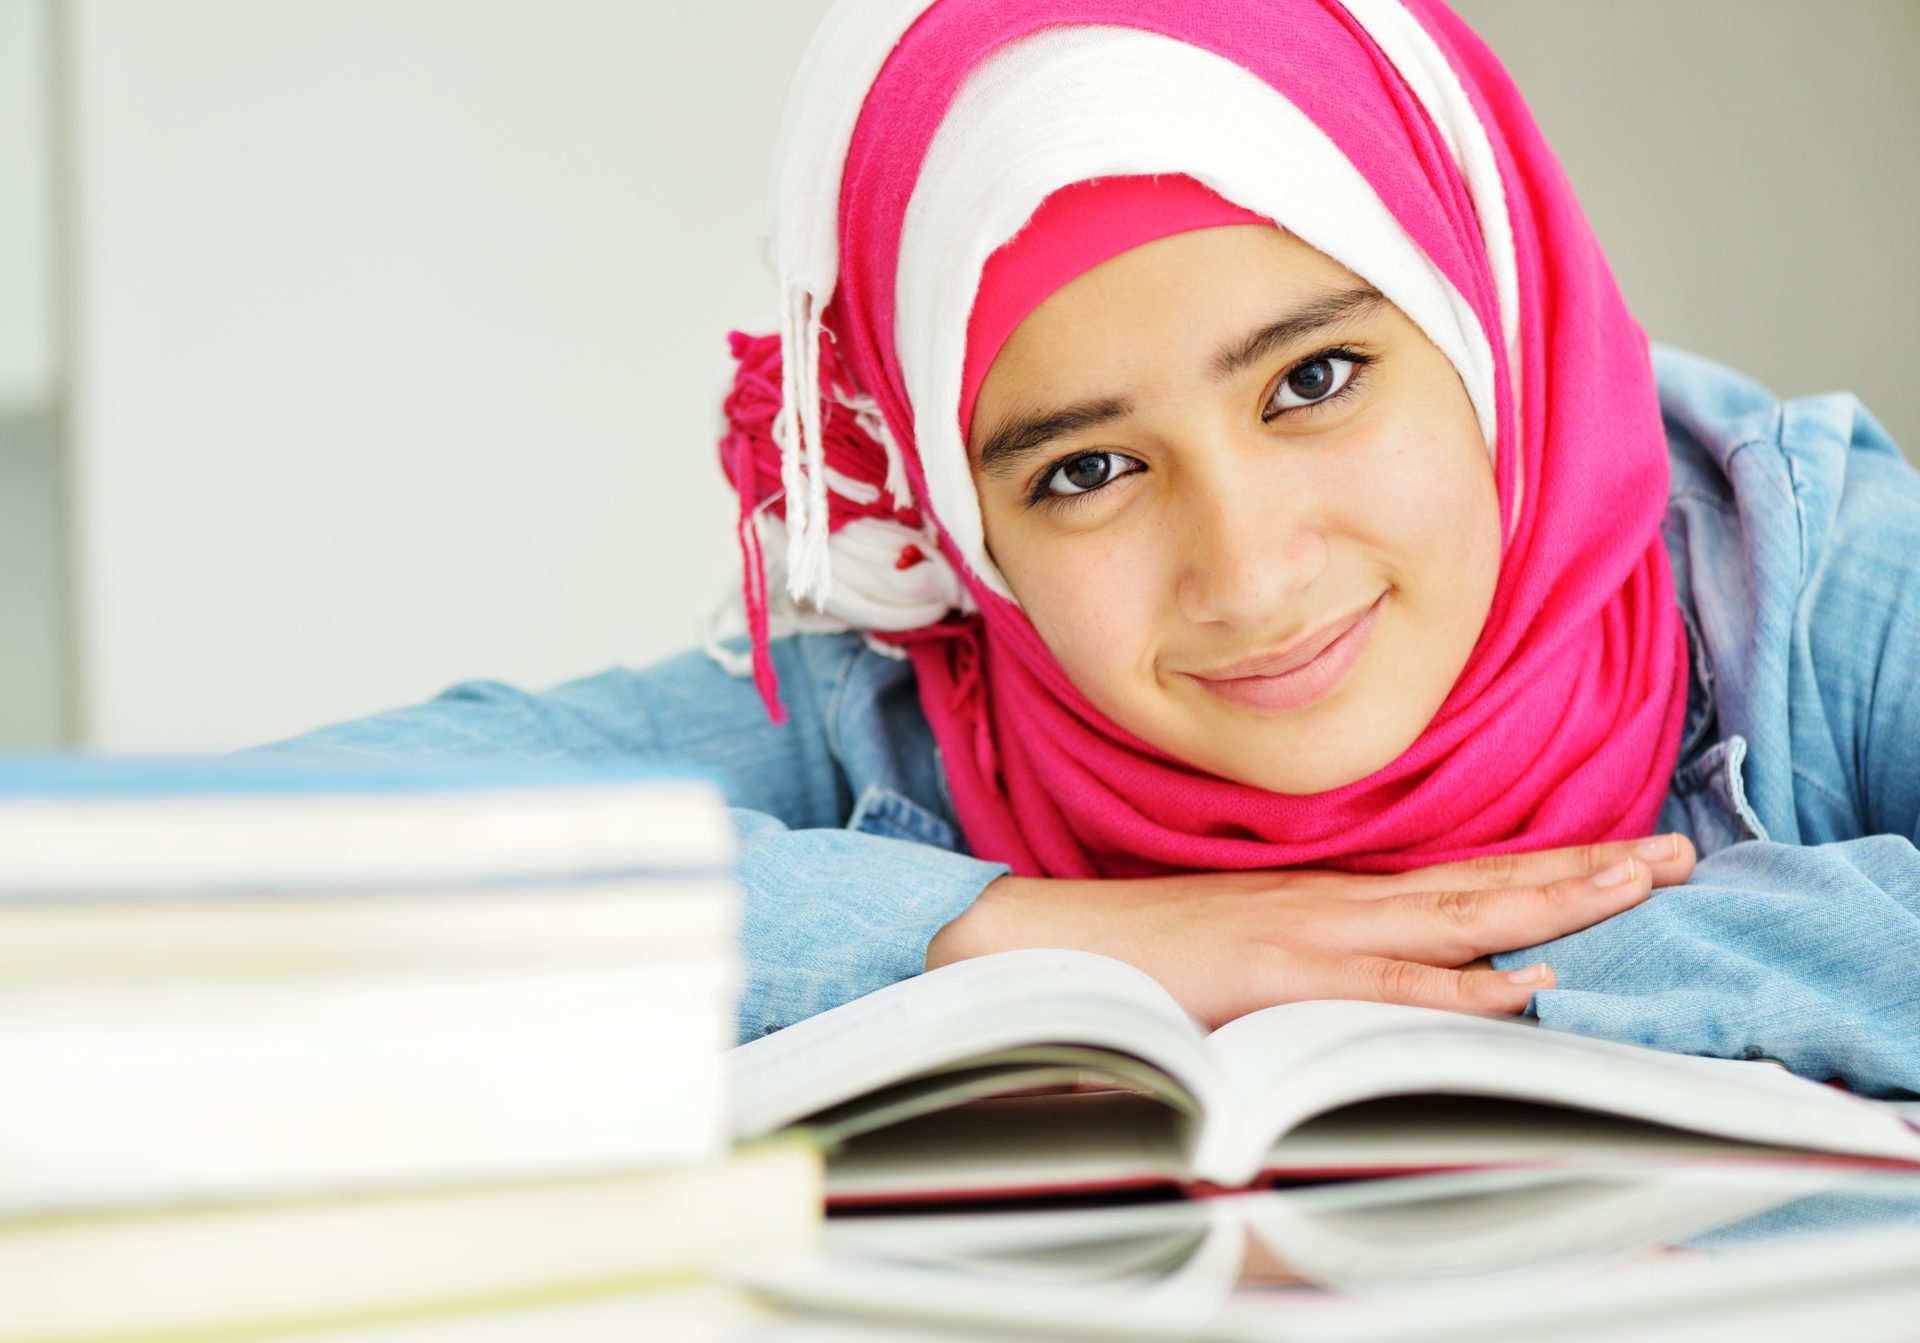 Muslim Community Thanks Library for Using Picture of Muslim Woman to Promote Positive Image of Islam